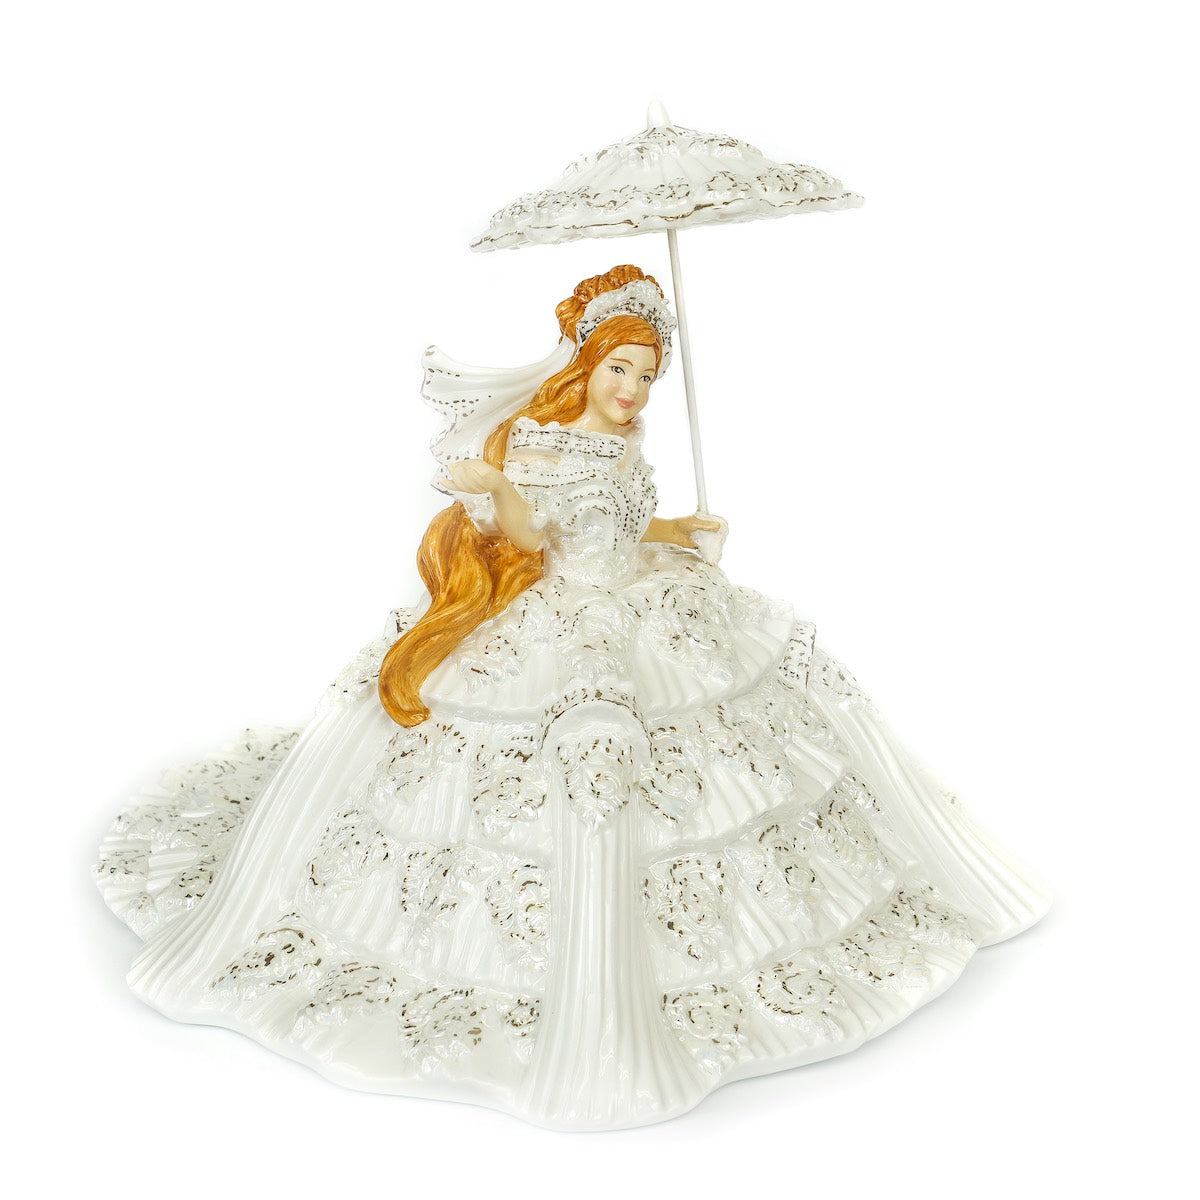 English Ladies Company Perfect Little Princess  Thelma Madine's flamboyant style is captured in our beautiful bone china figurines. Perfect Little Princess is the latest in our Communion range and our first Redhead! She is hand made and hand decorated by expert craftsmen and women, with elegant details of real platinum and Mother of Pearl lustre.